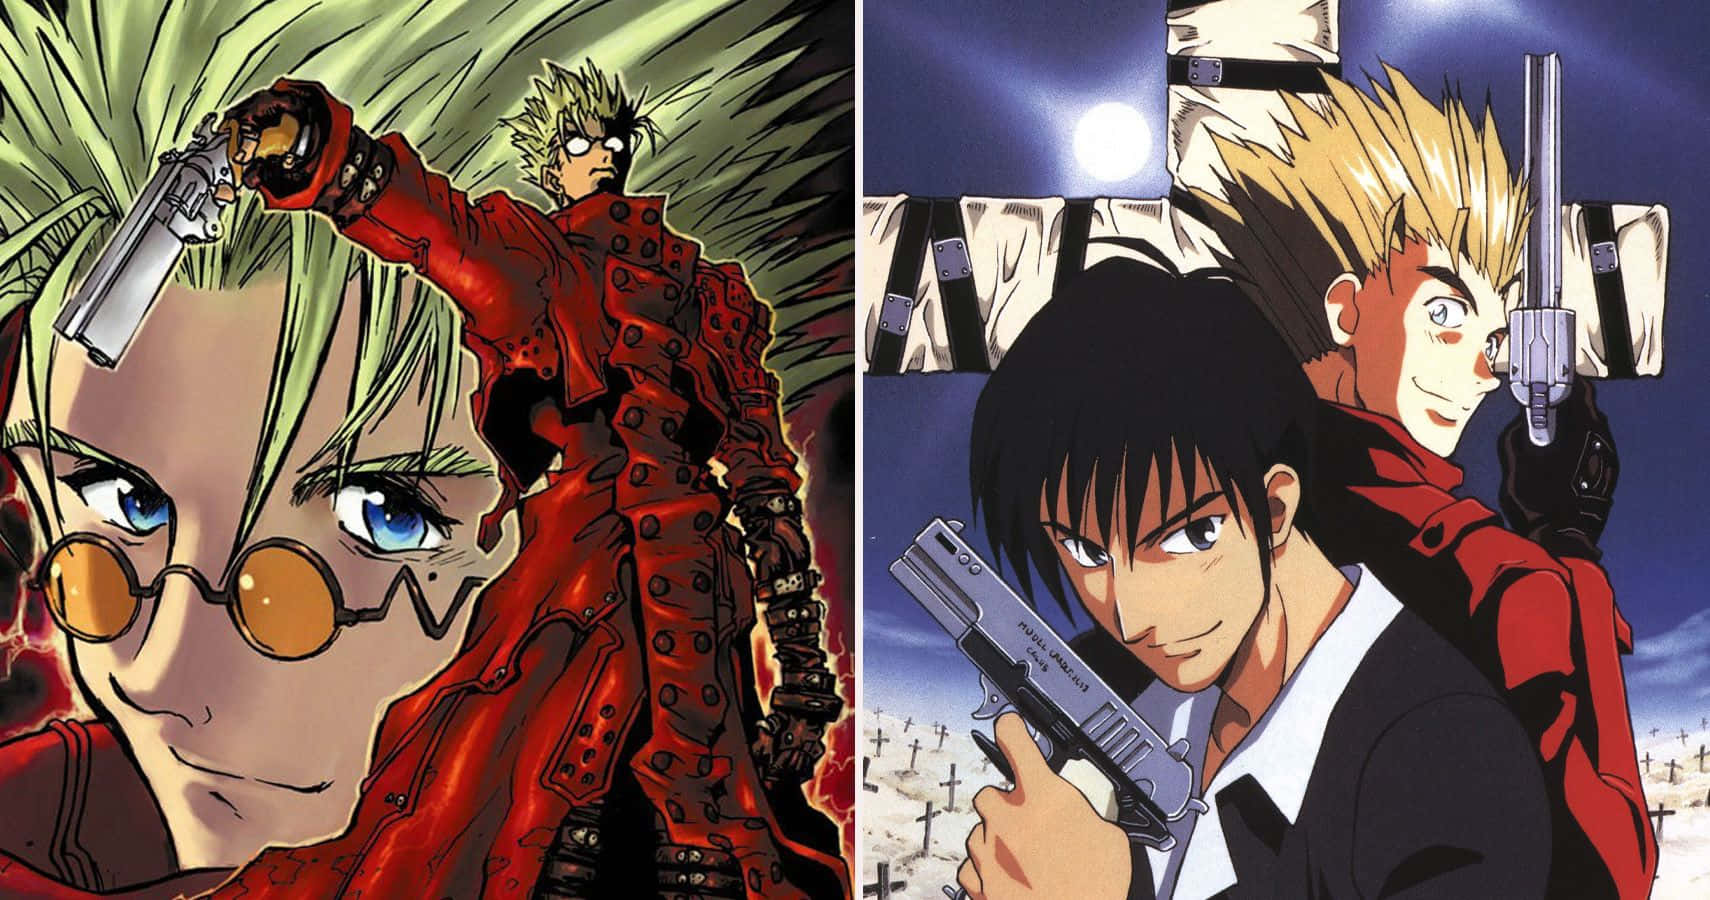 Vash the Stampede, the iconic protagonist of Trigun!